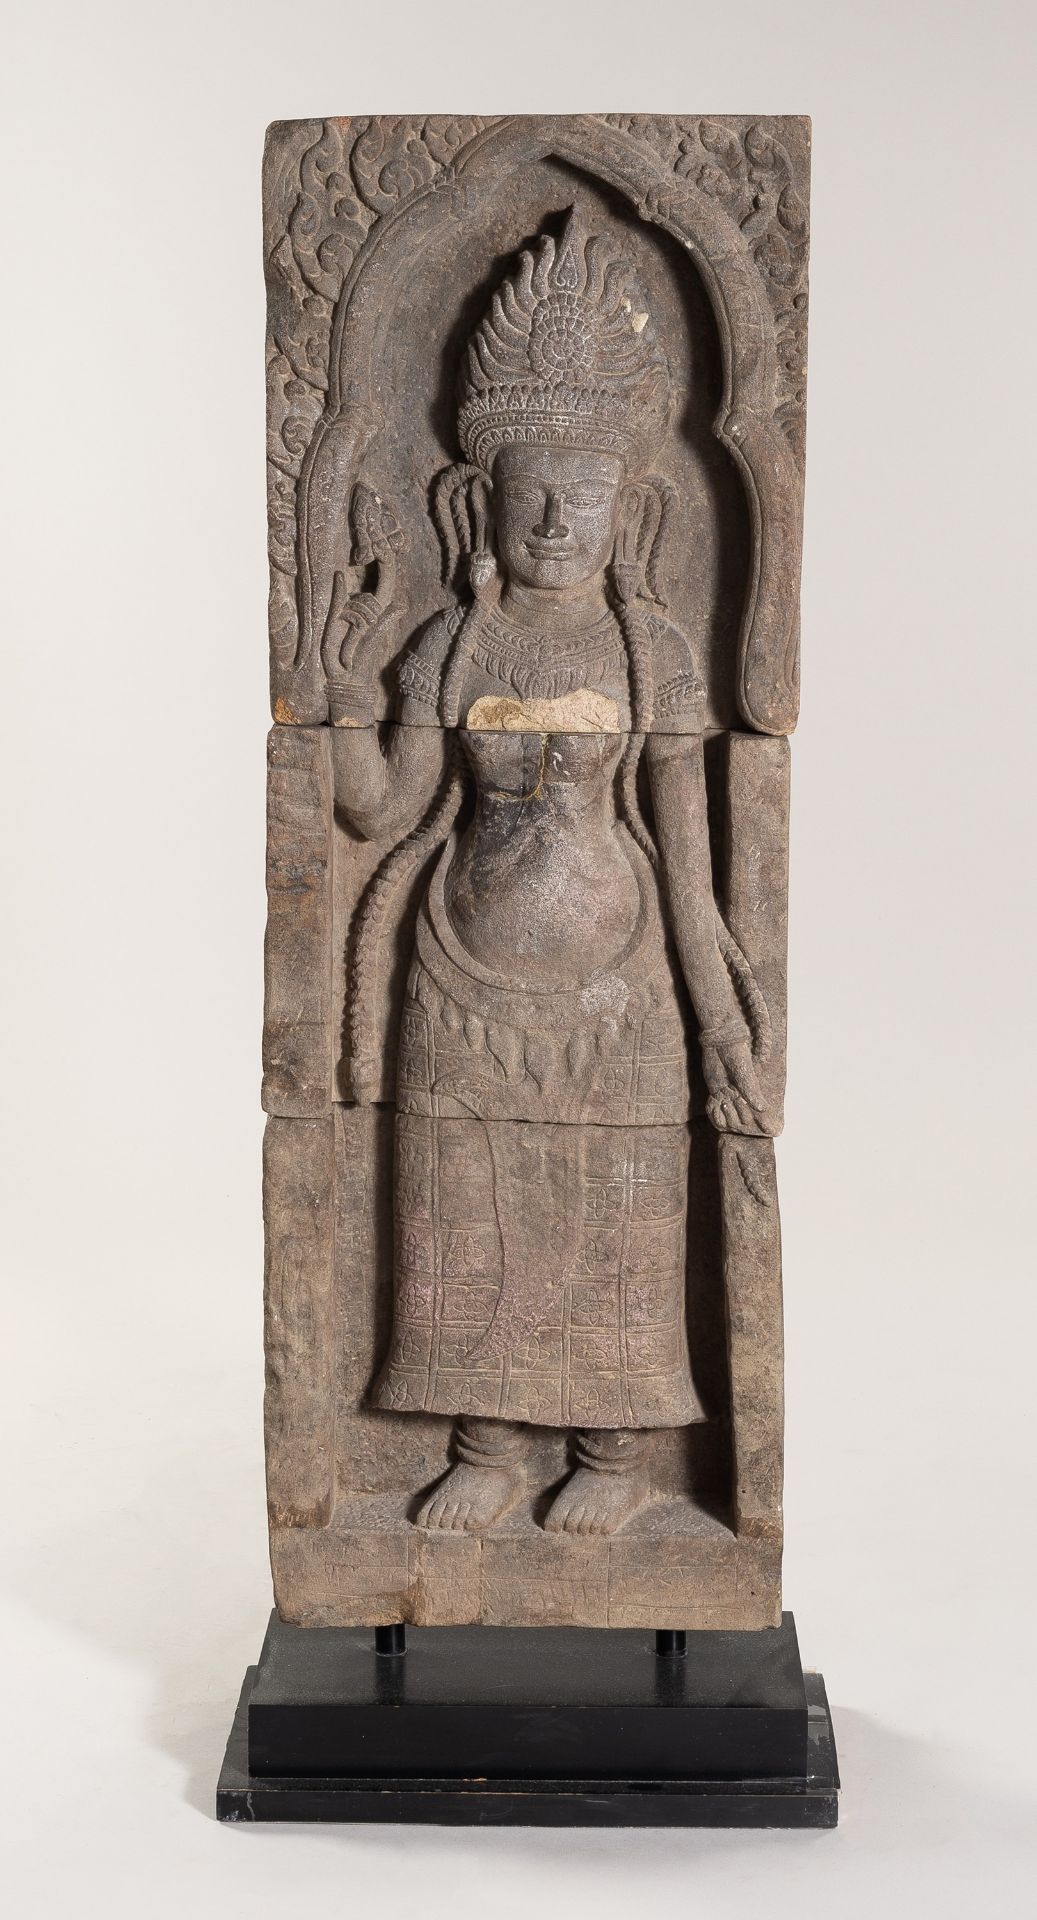 A VERY LARGE KHMER-STYLE SANDSTONE FIGURE OF AN APSARA, c. 1920s